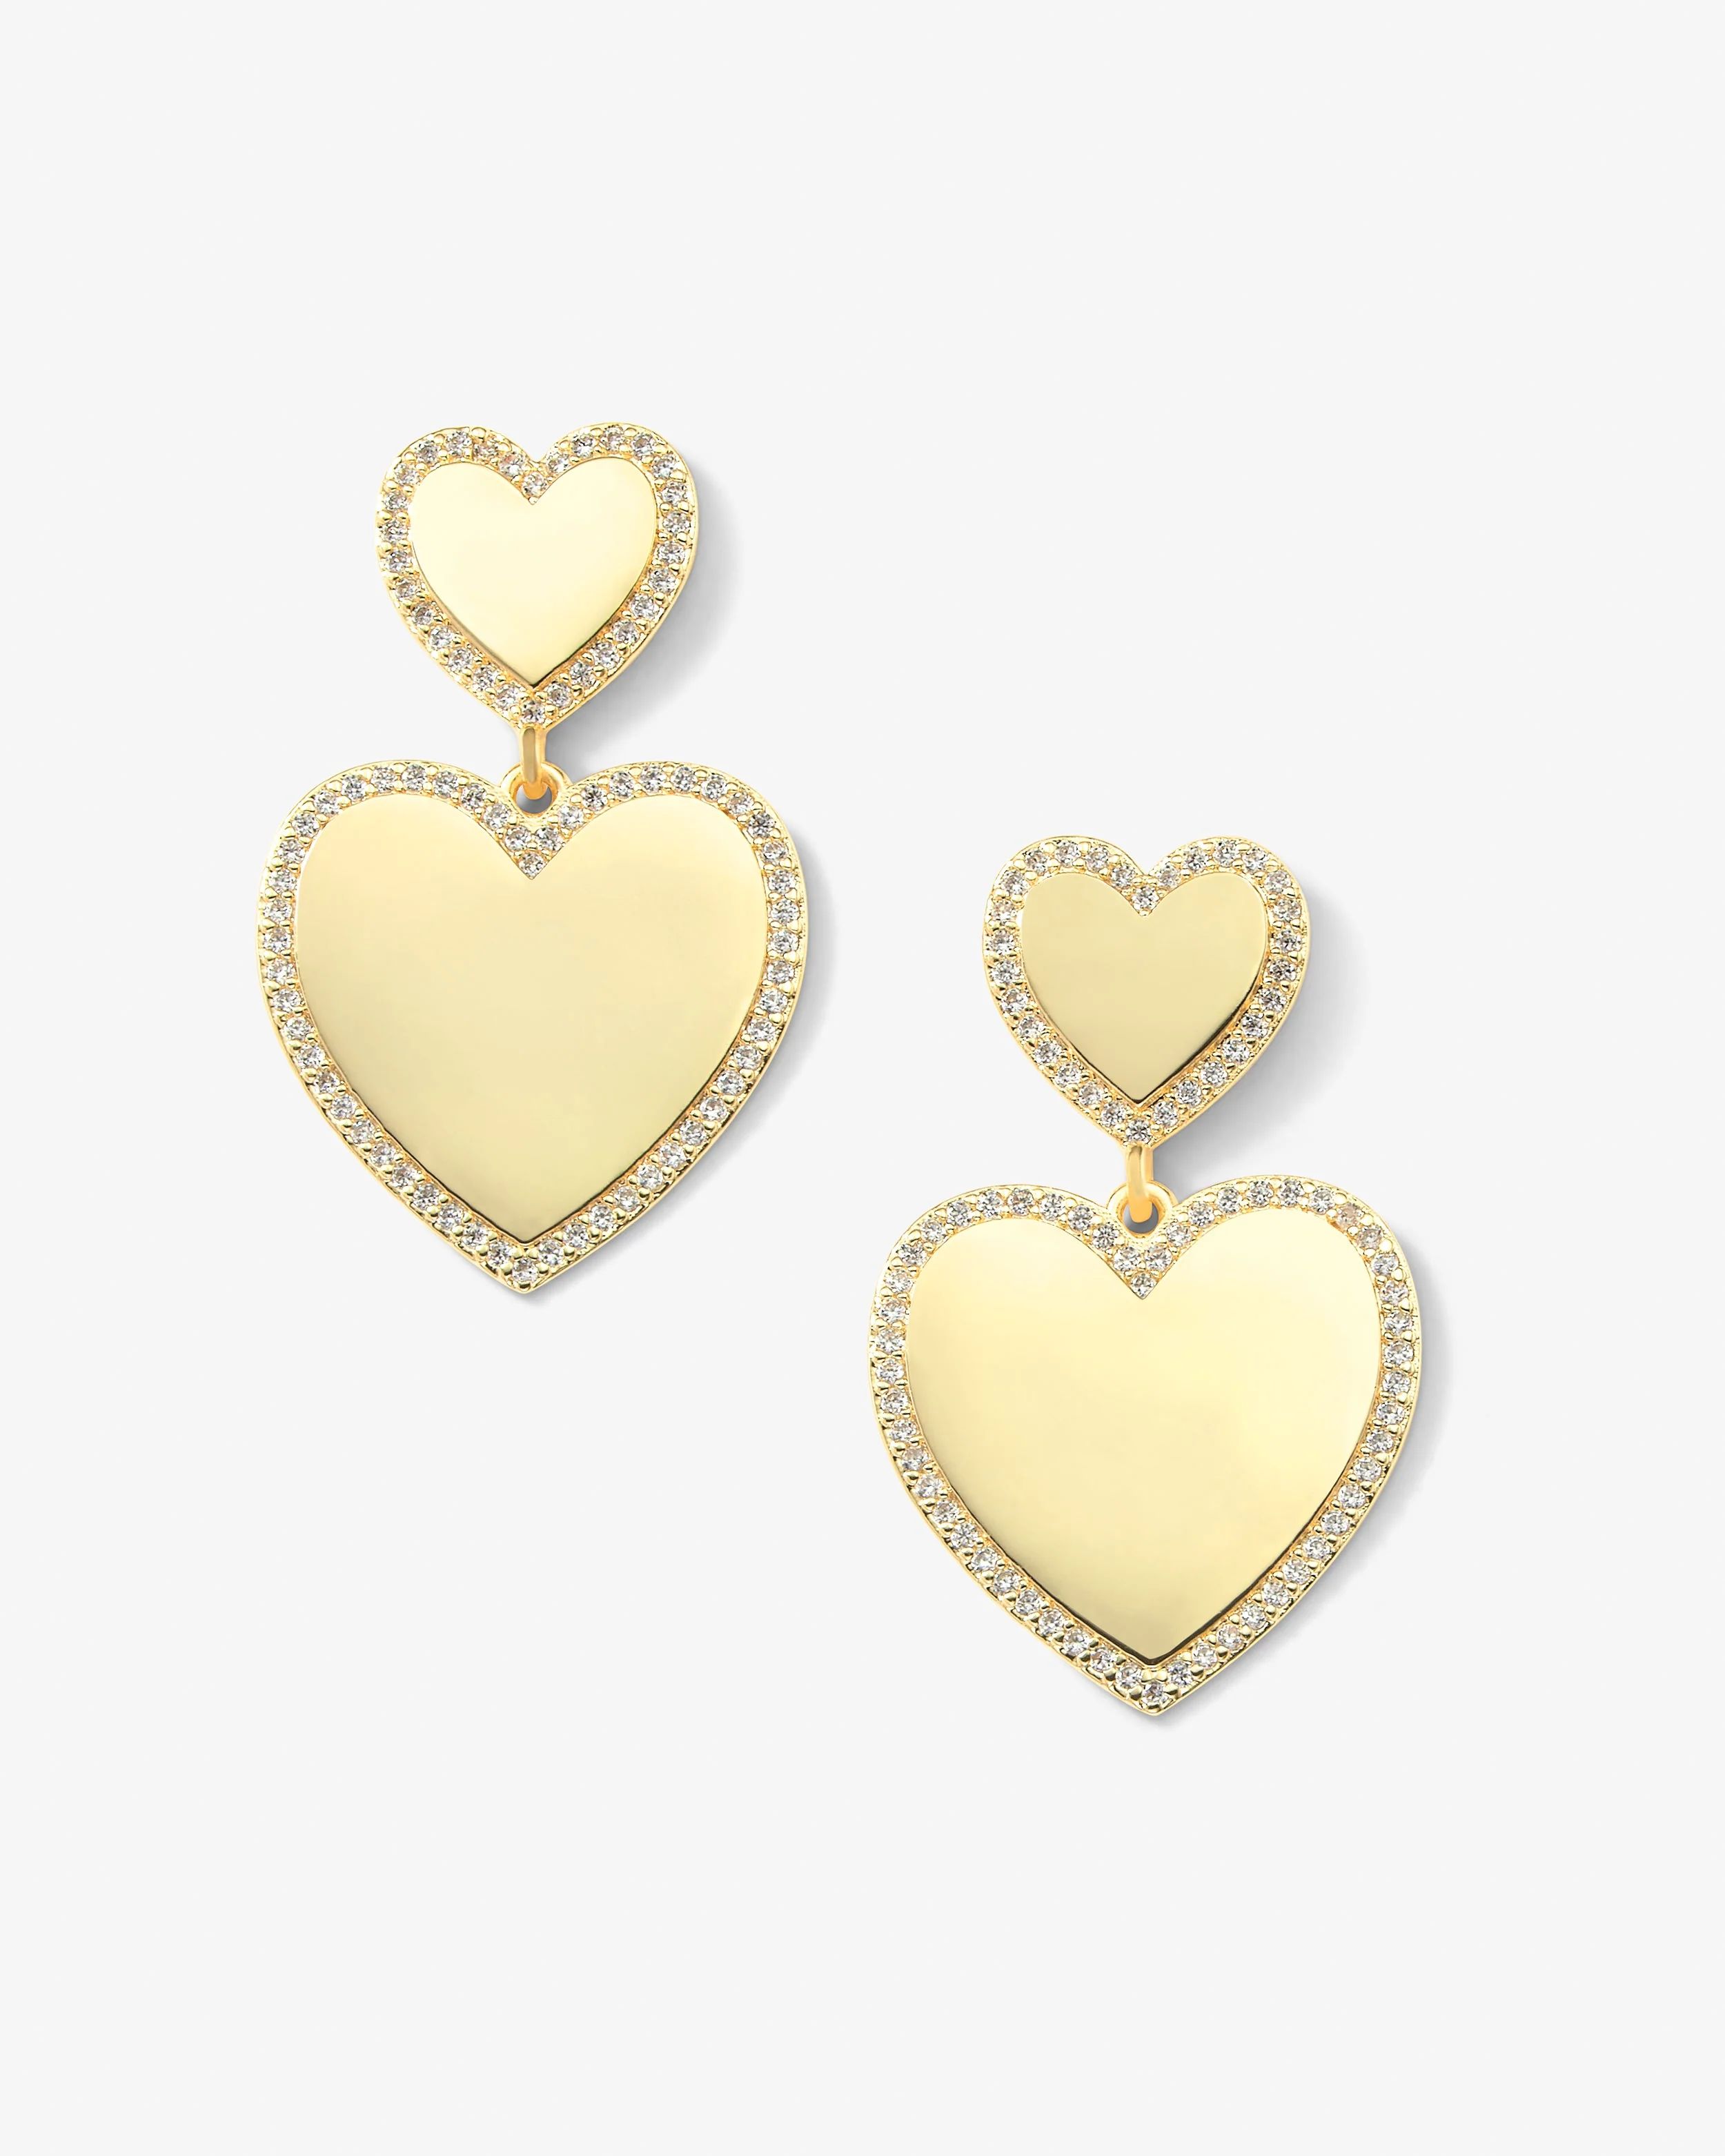 XL You Have My Heart Pave Earrings - Gold|White Diamondettes | Melinda Maria